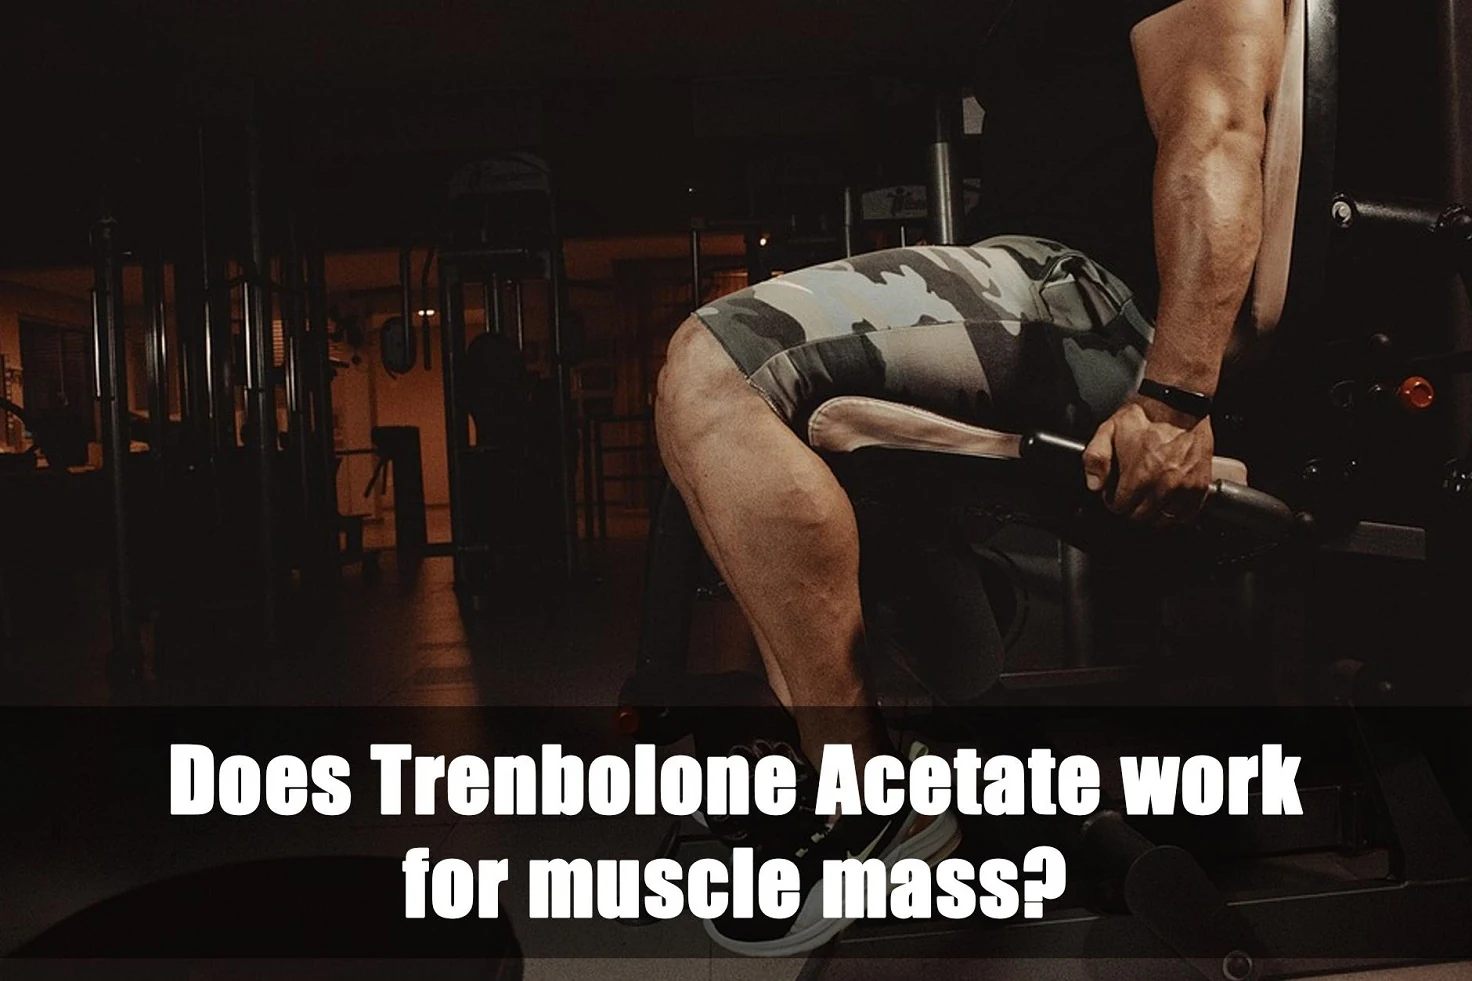 Trenbolone Acetate for muscle mass